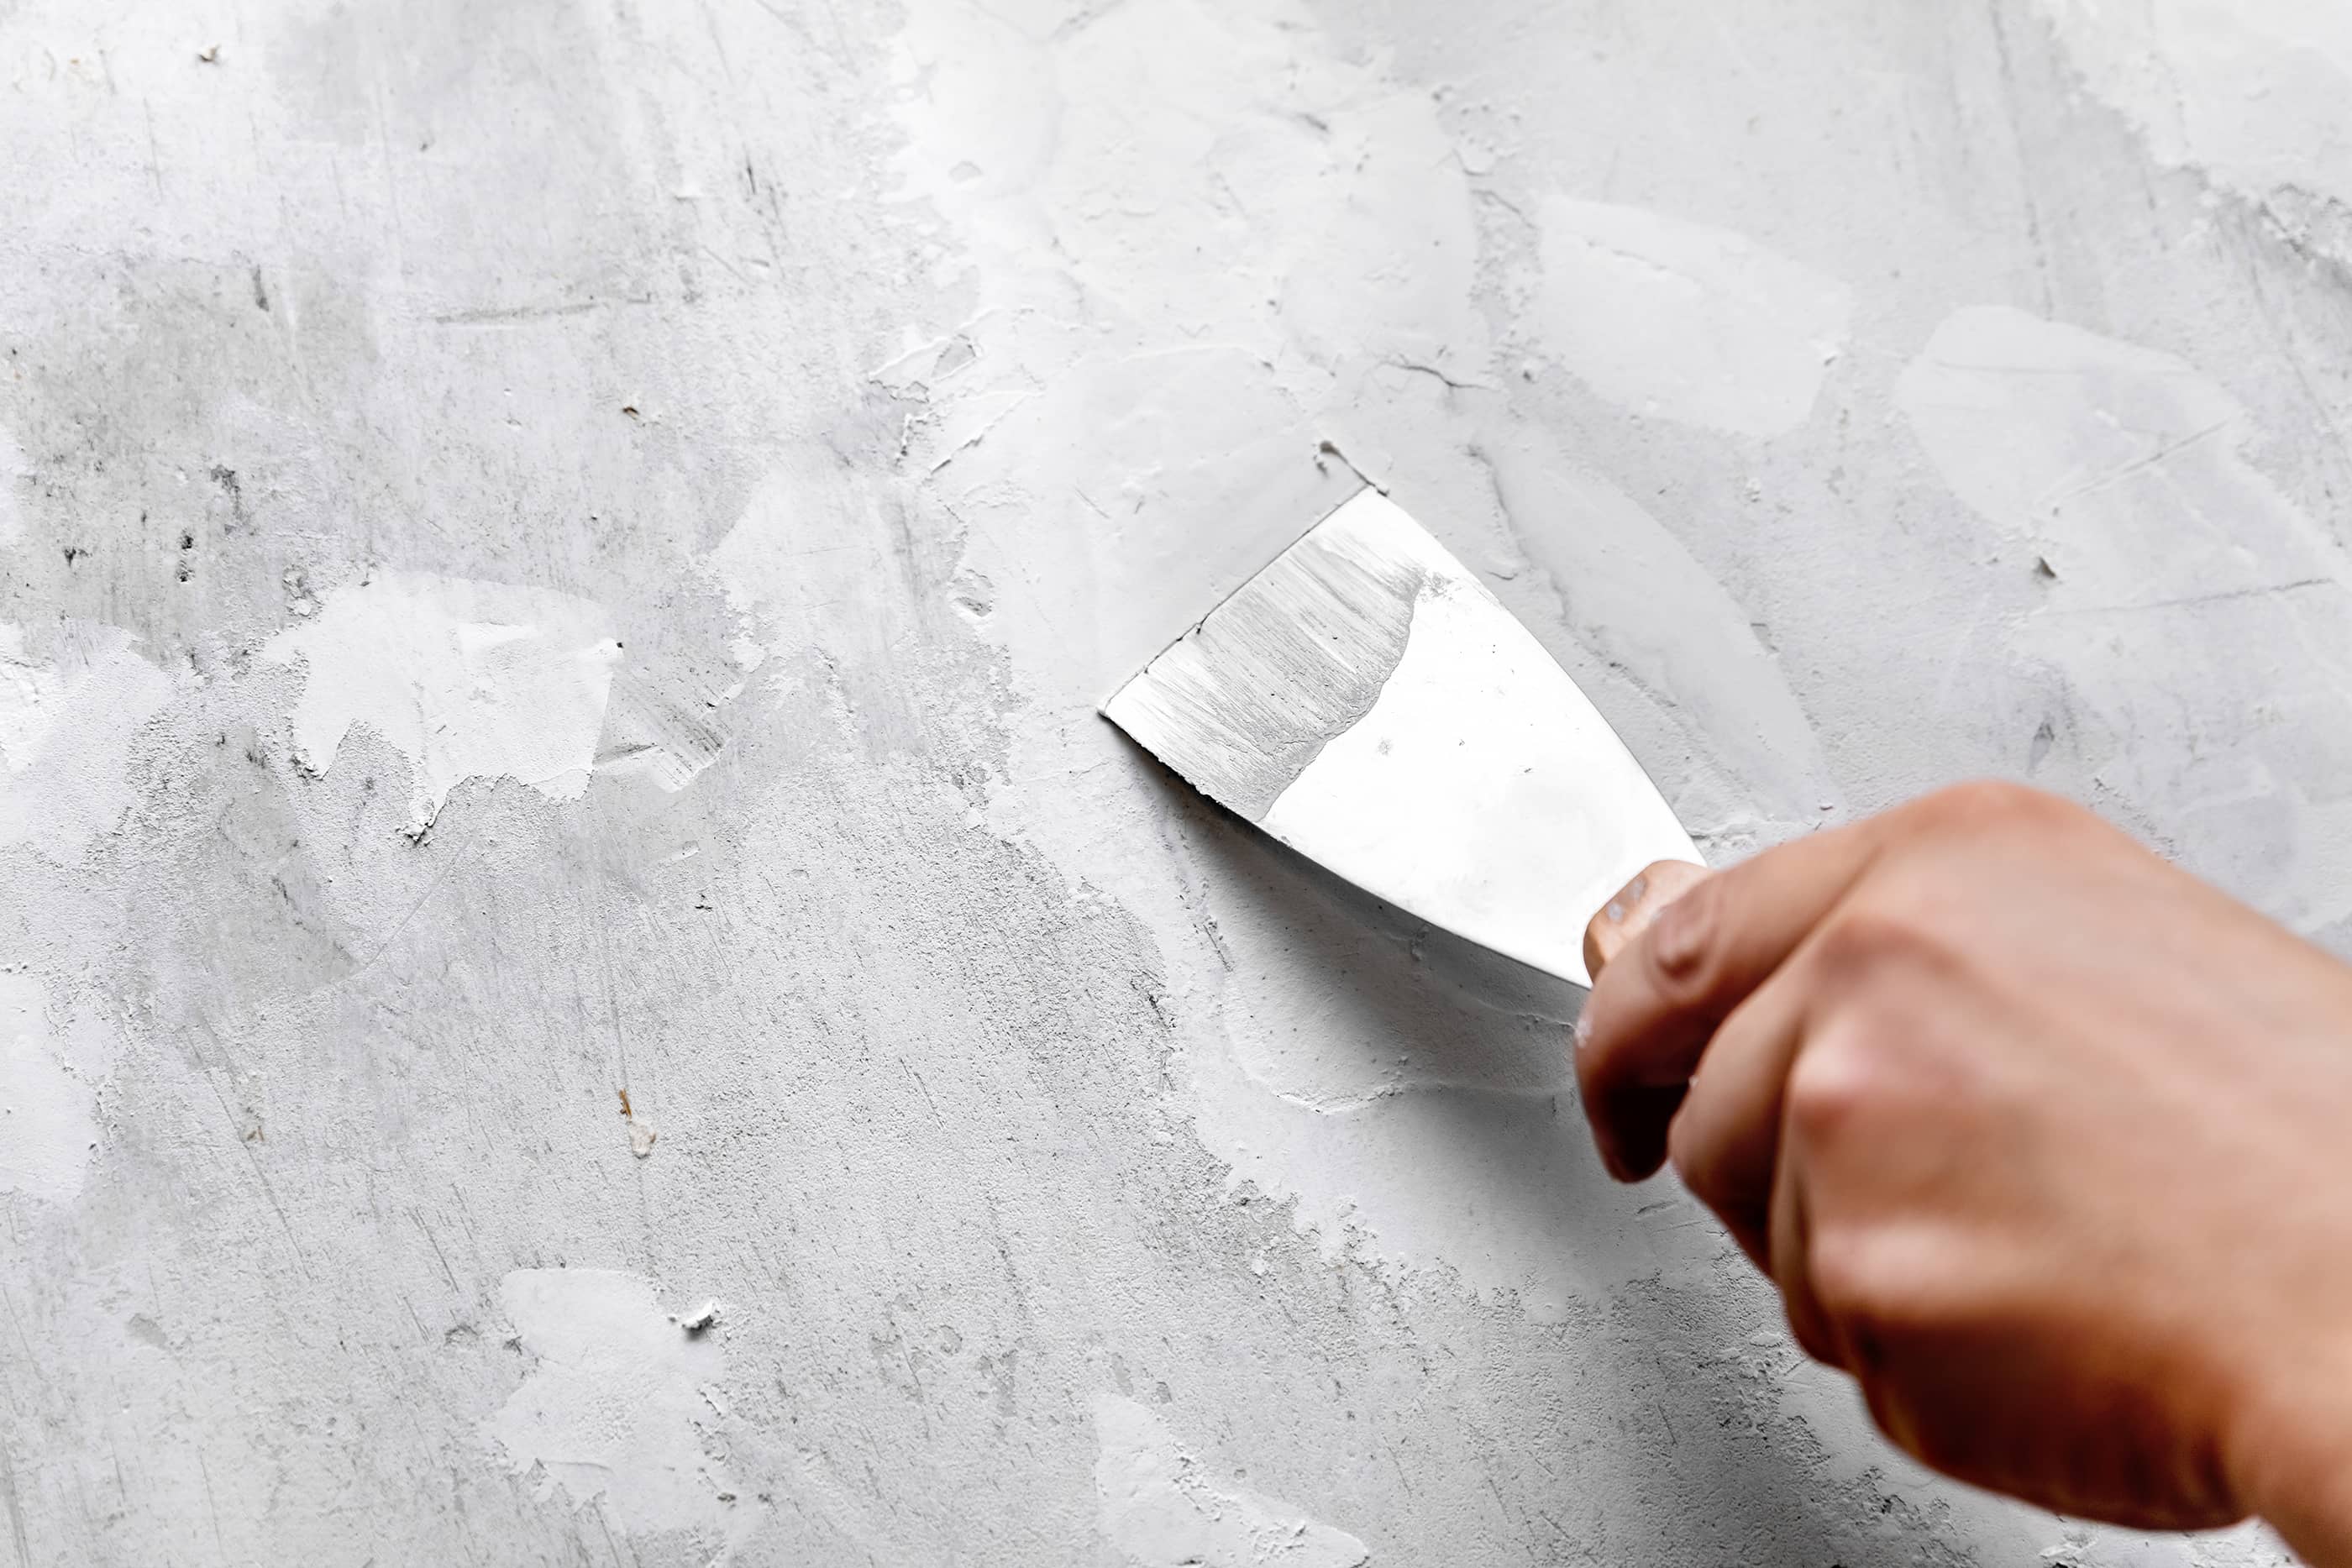 How to fix a hole in your wall.  2 Use the putty knife to apply spackle around the hole